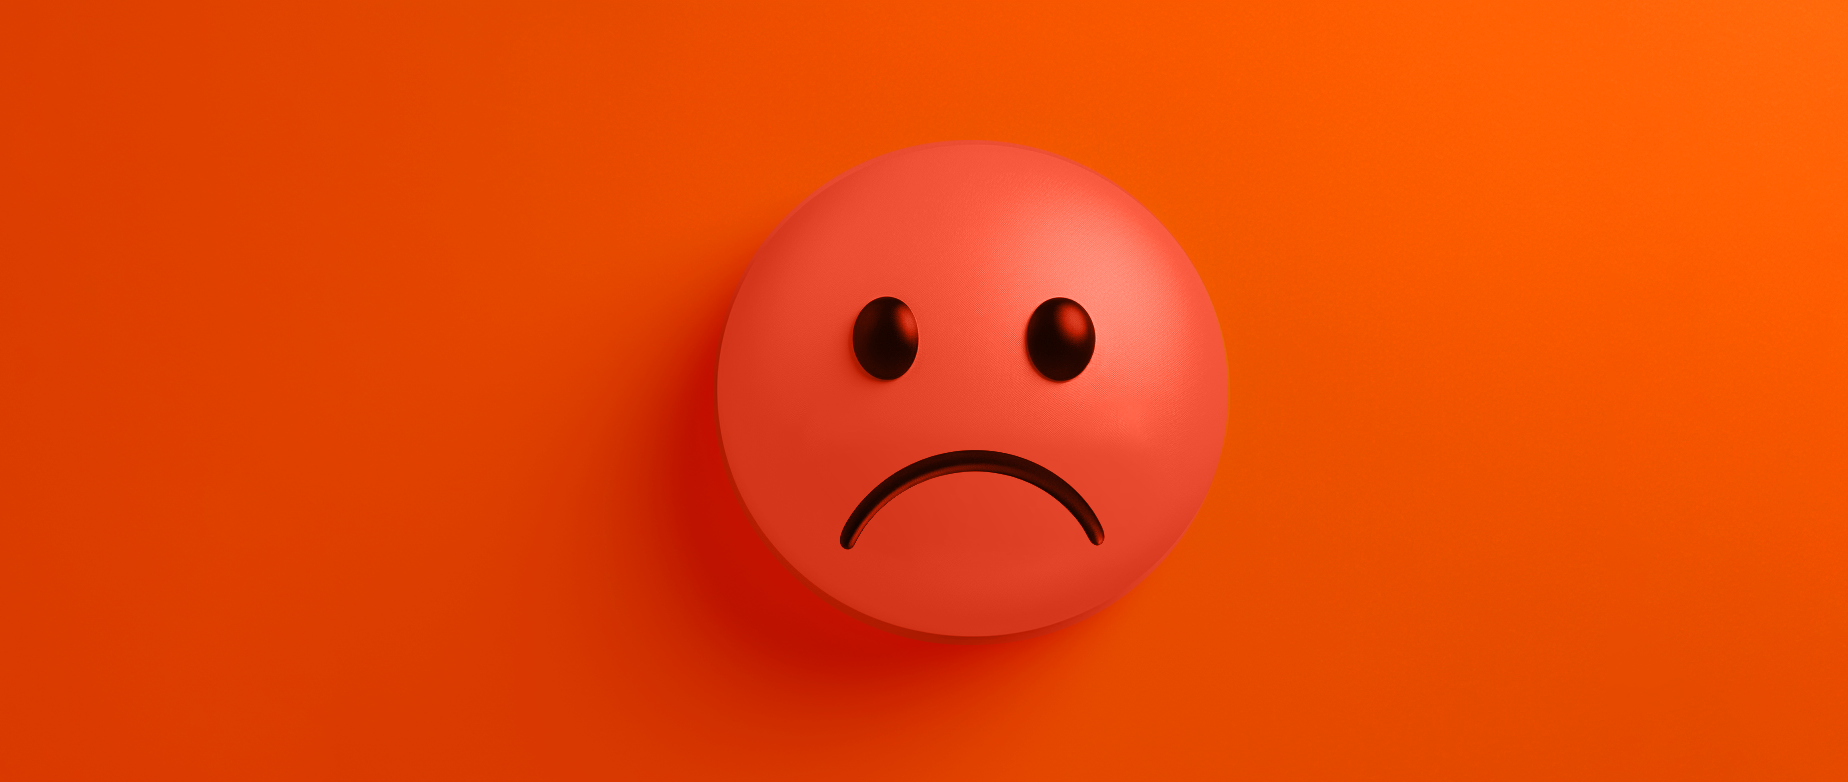 Red sad face over a red background.